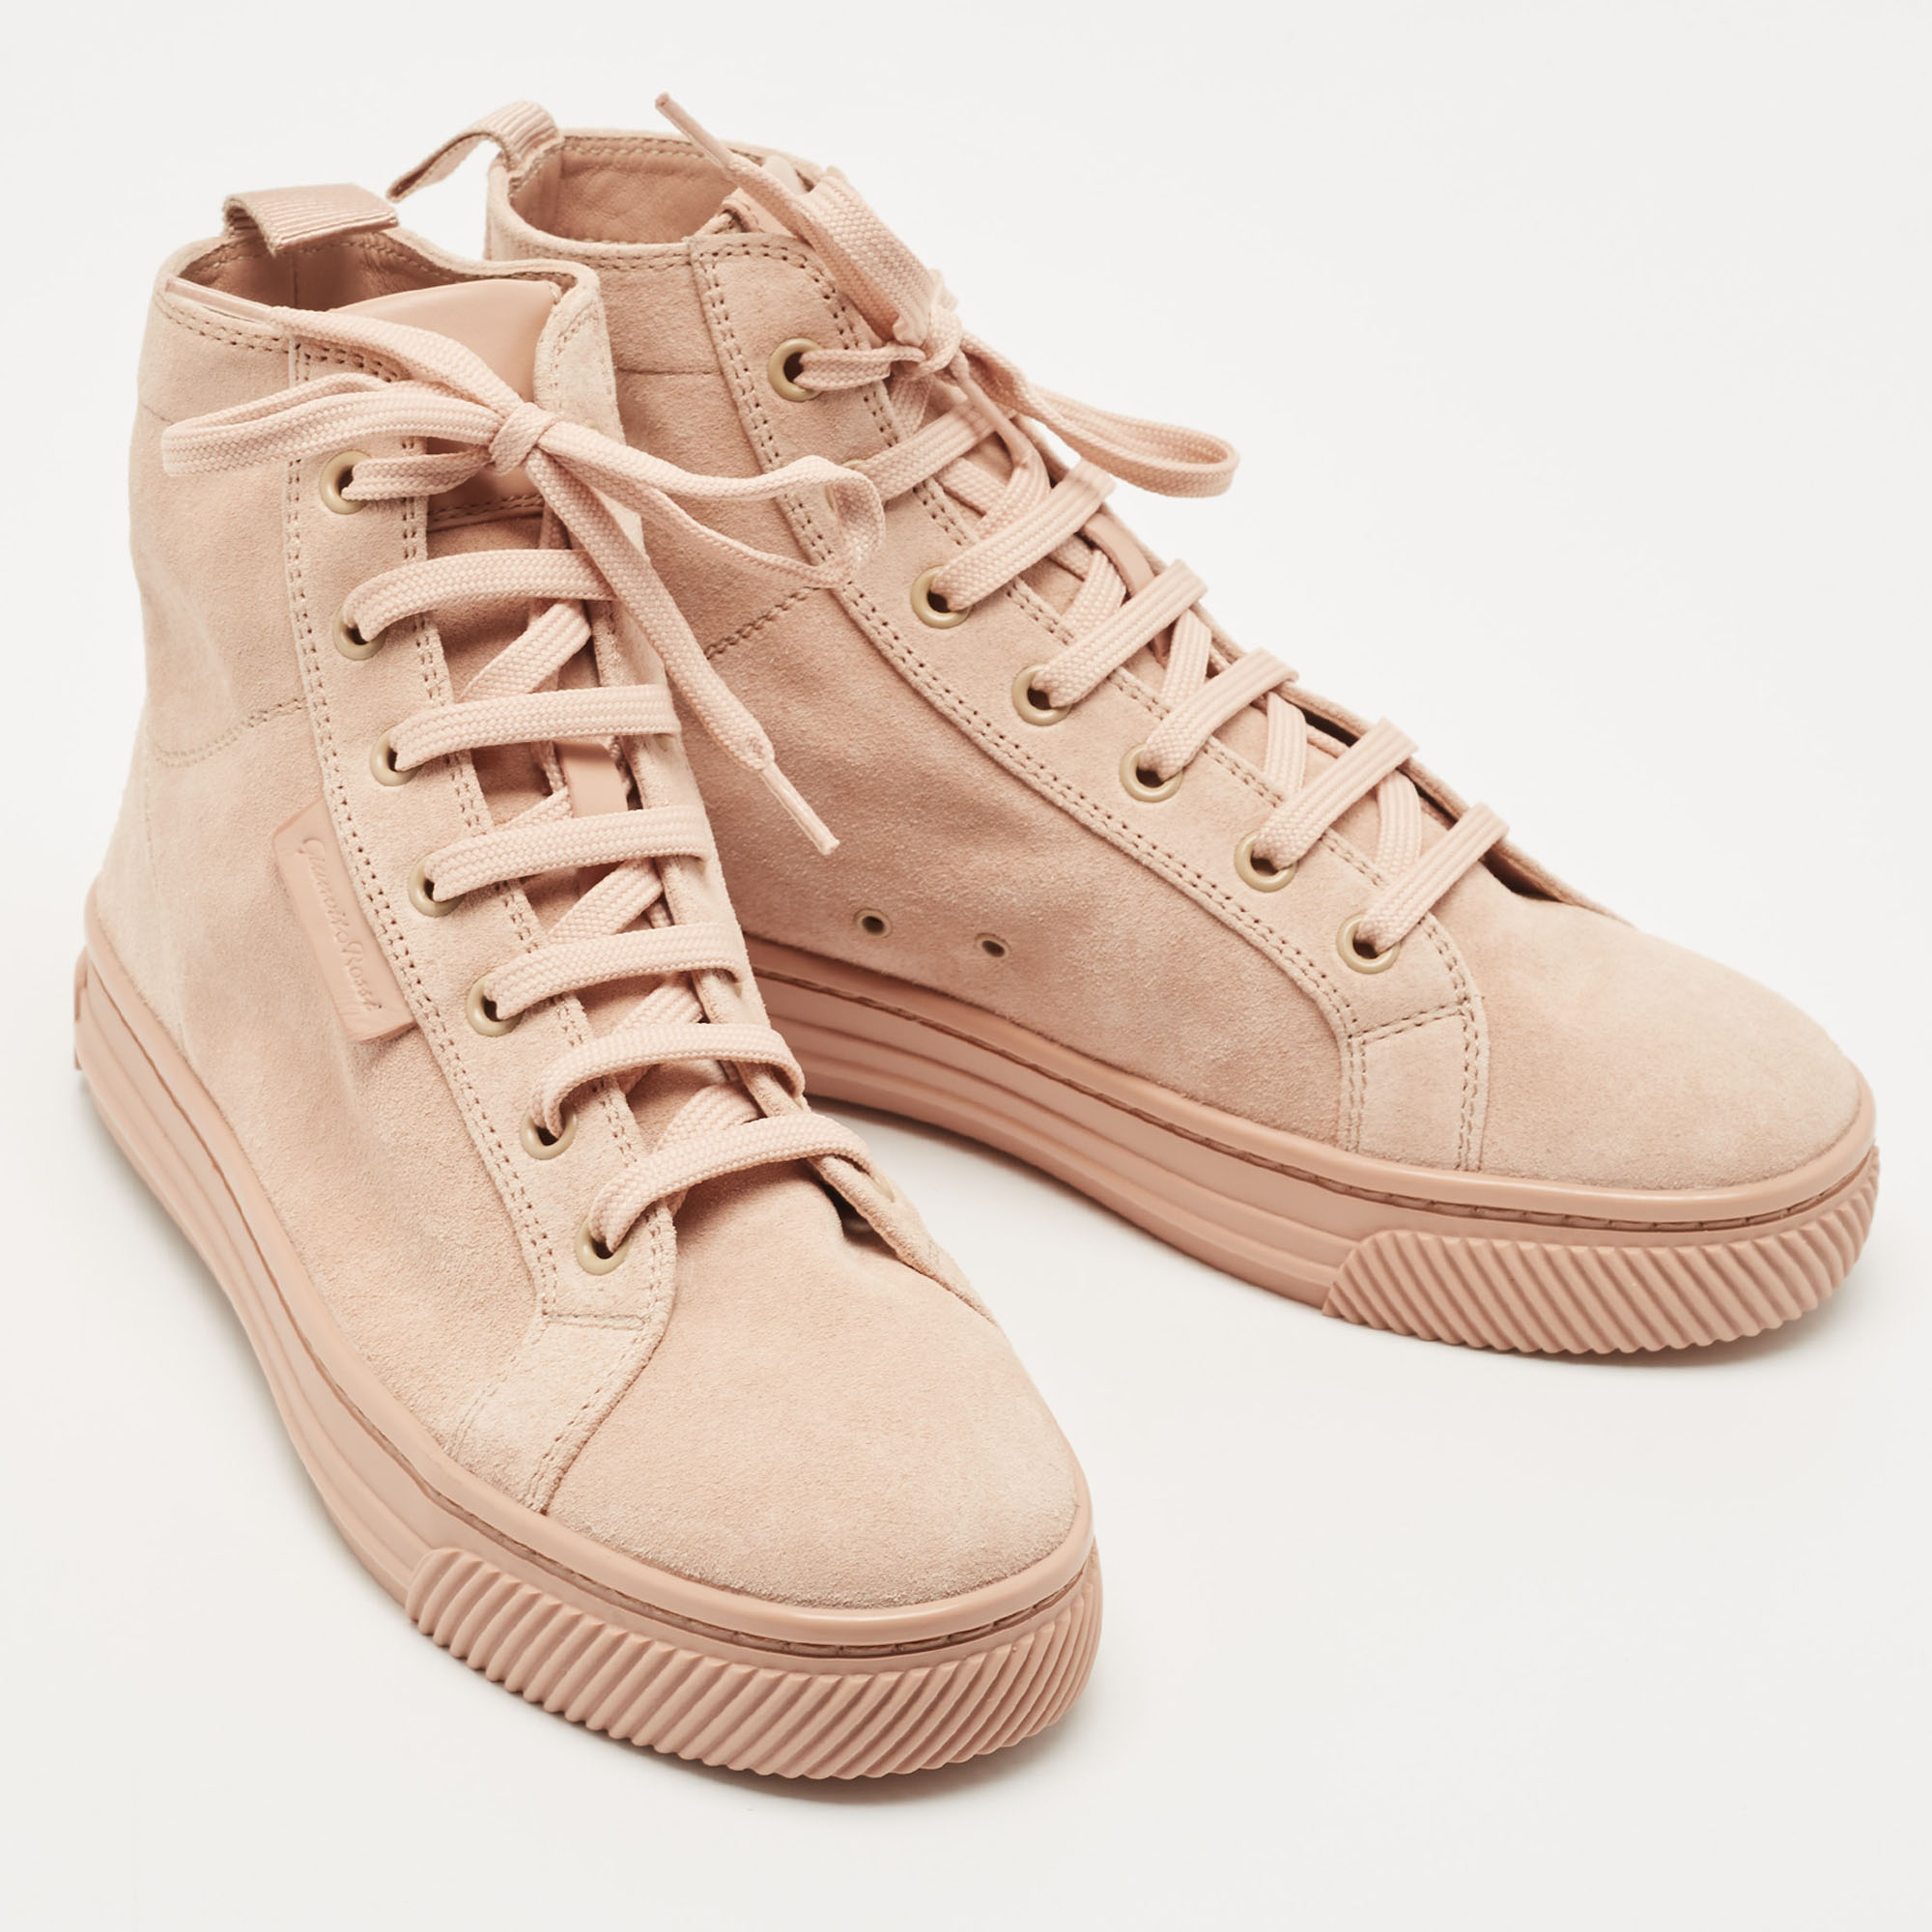 Gianvito Rossi Pink Suede High Top Sneakers Size 36.5